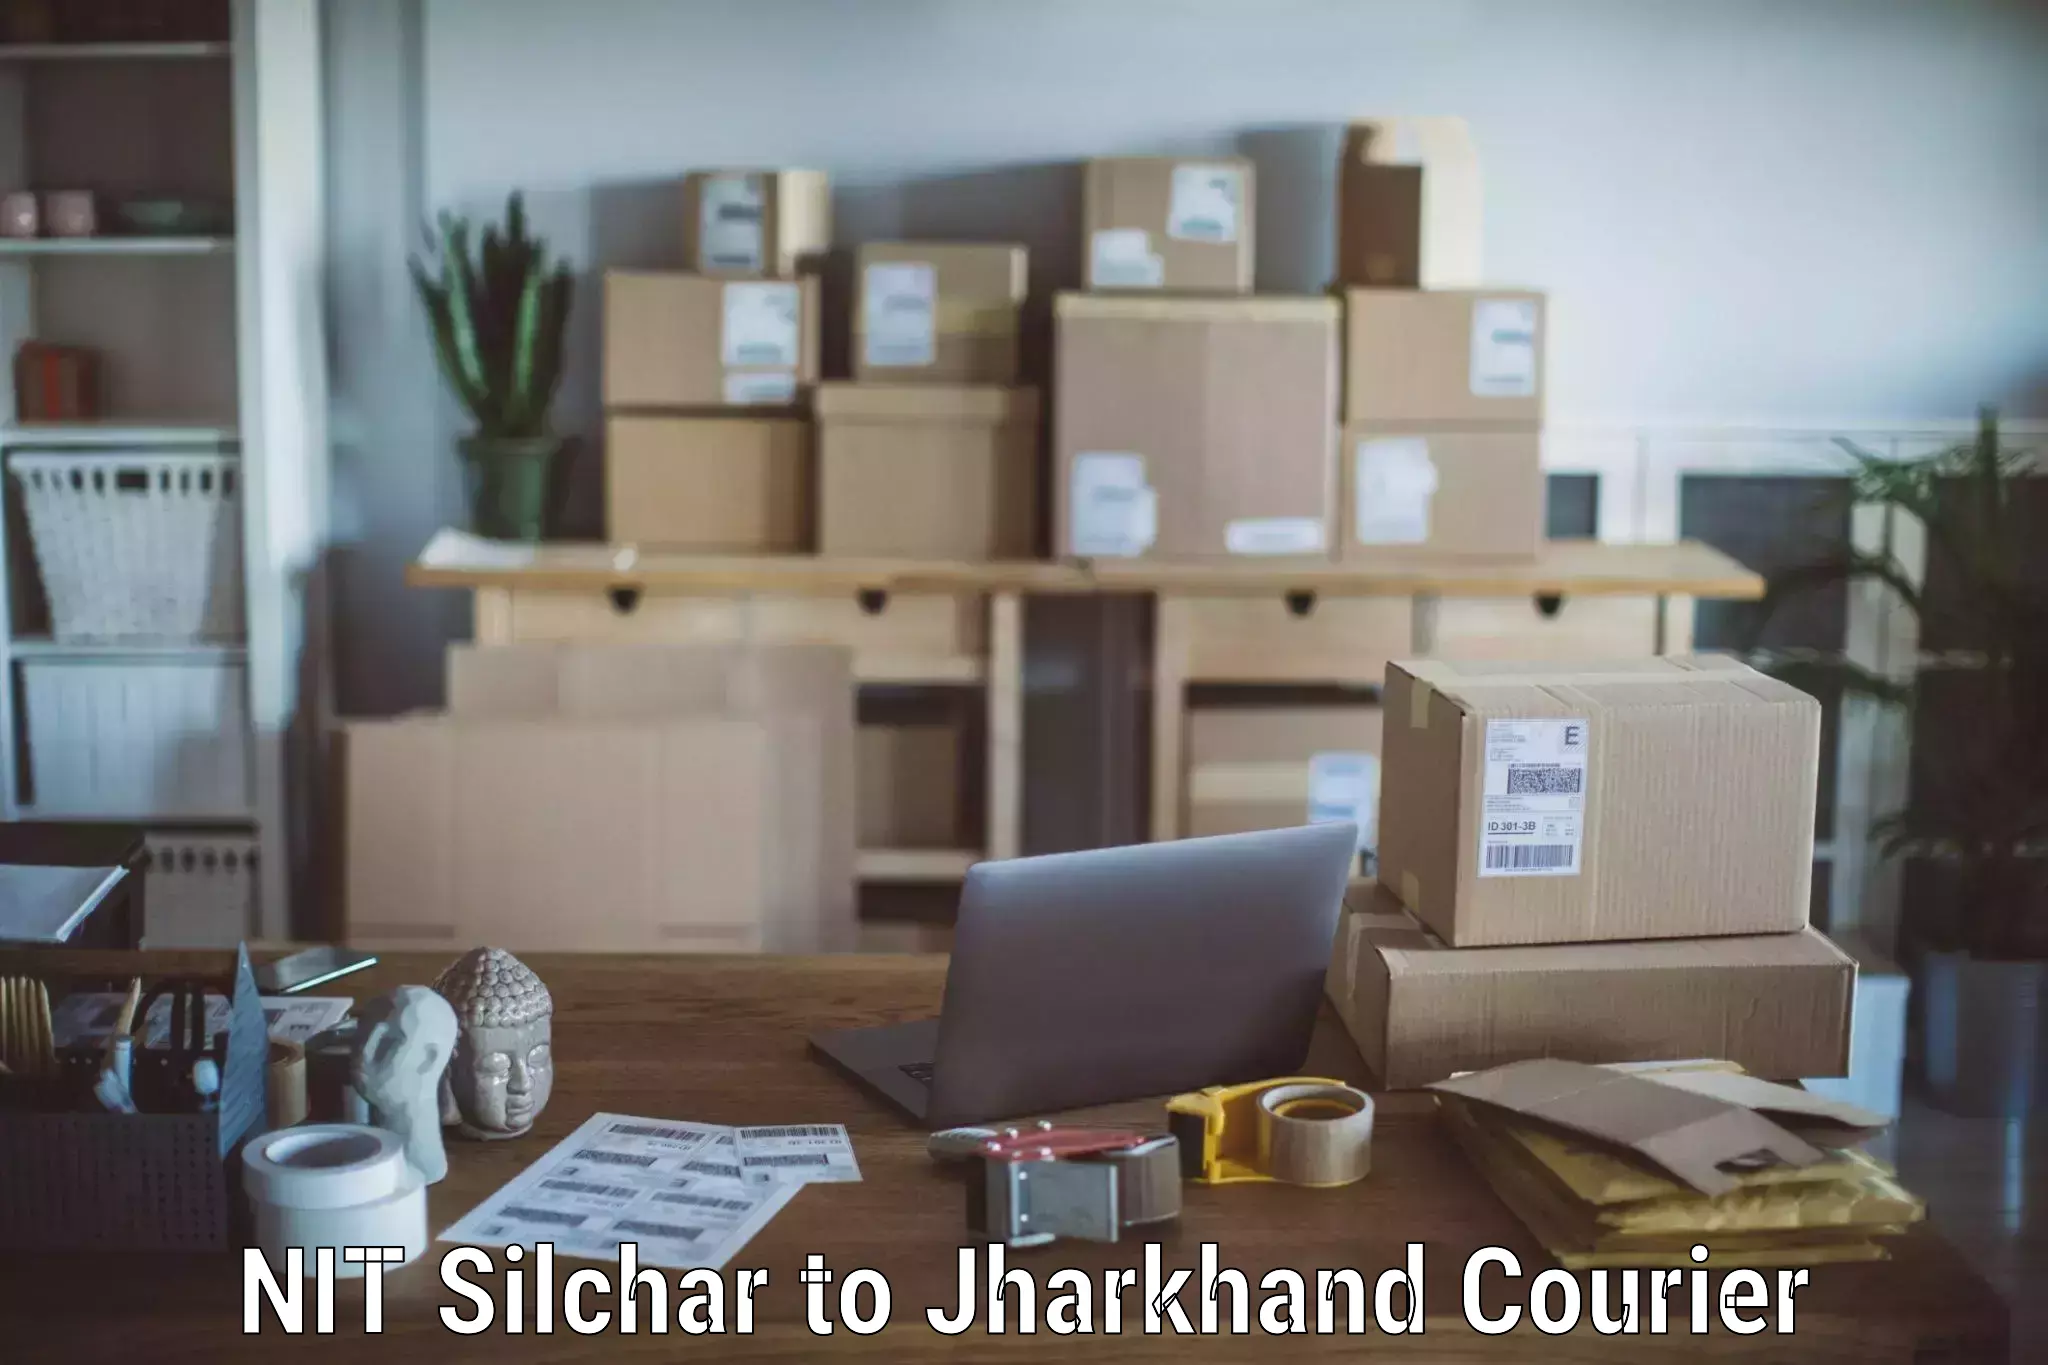 Professional moving company NIT Silchar to Jharia